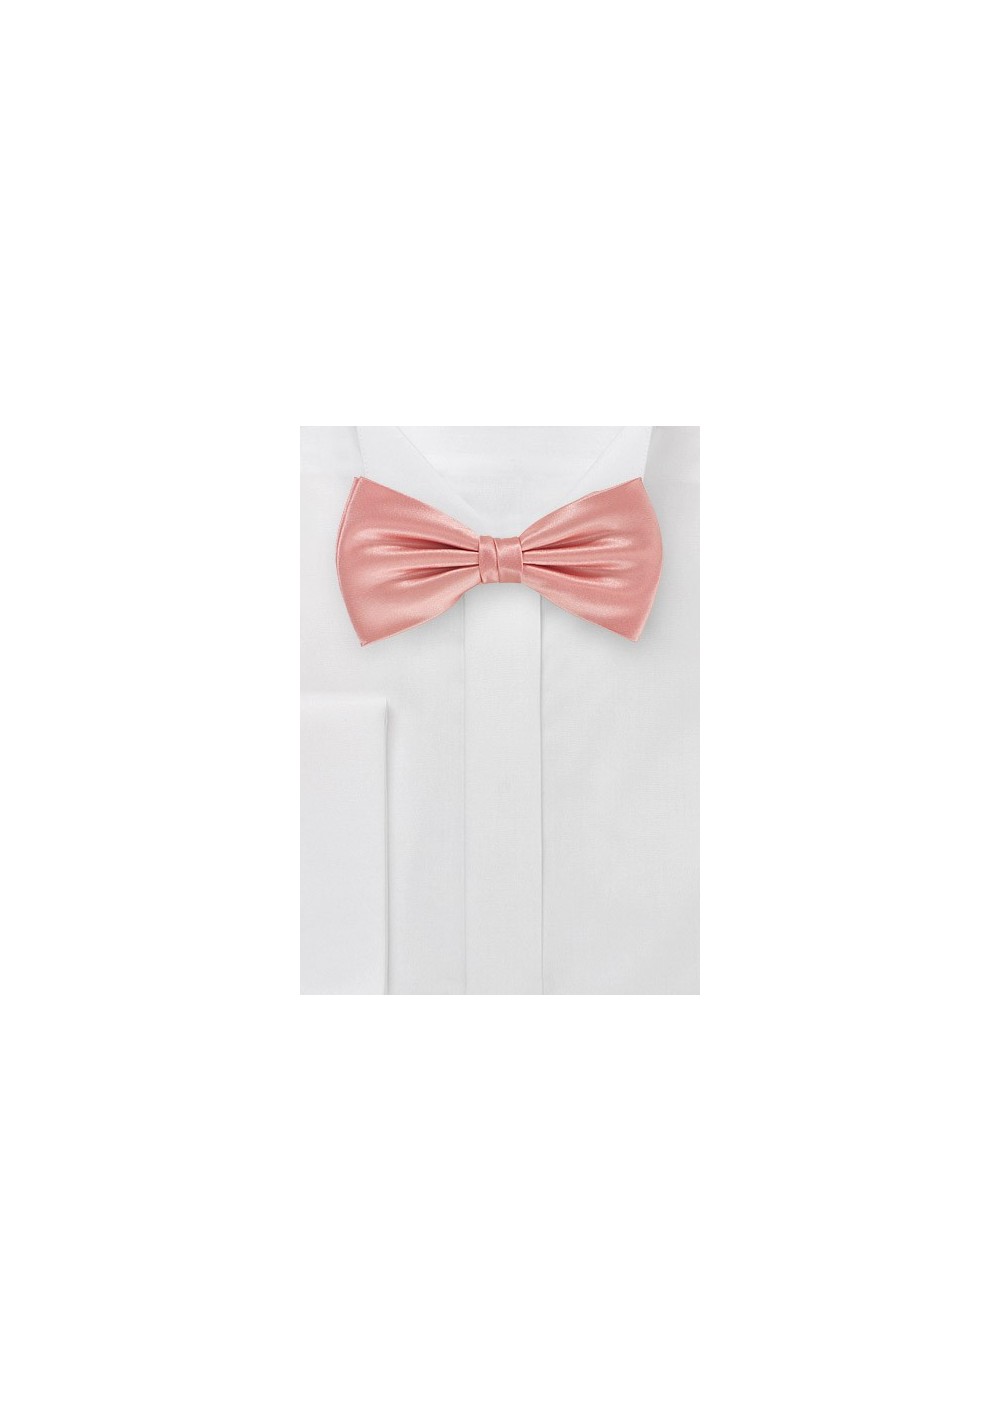 Bow Tie in Victorian Pink